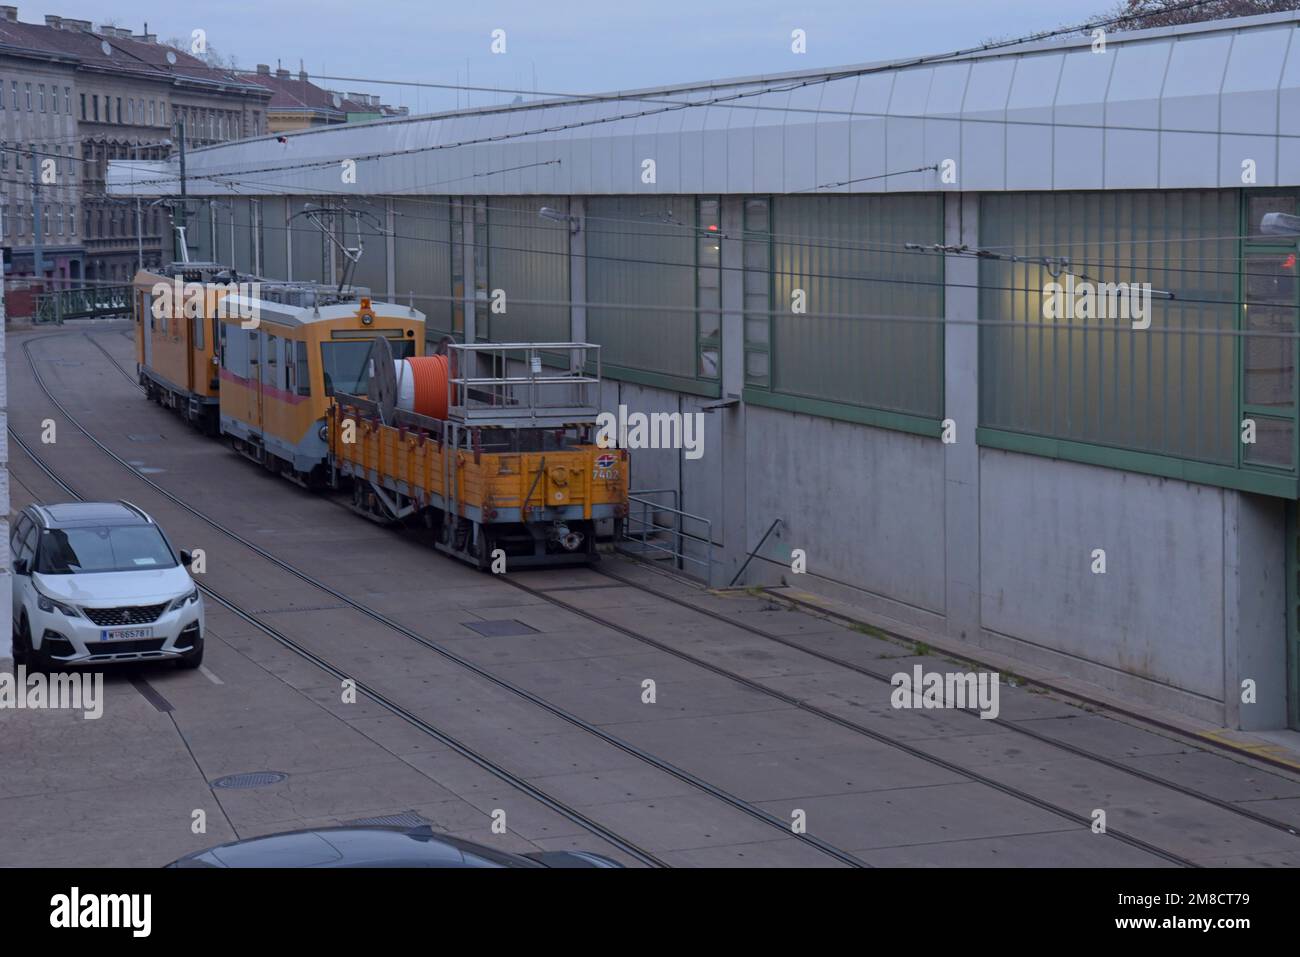 Maintenance and repair vehicles for the Vienna Metro network parked alongside the depot in Betriebsbahnhof Michelbeuern, Vienna, Austria. Dec 202s Stock Photo